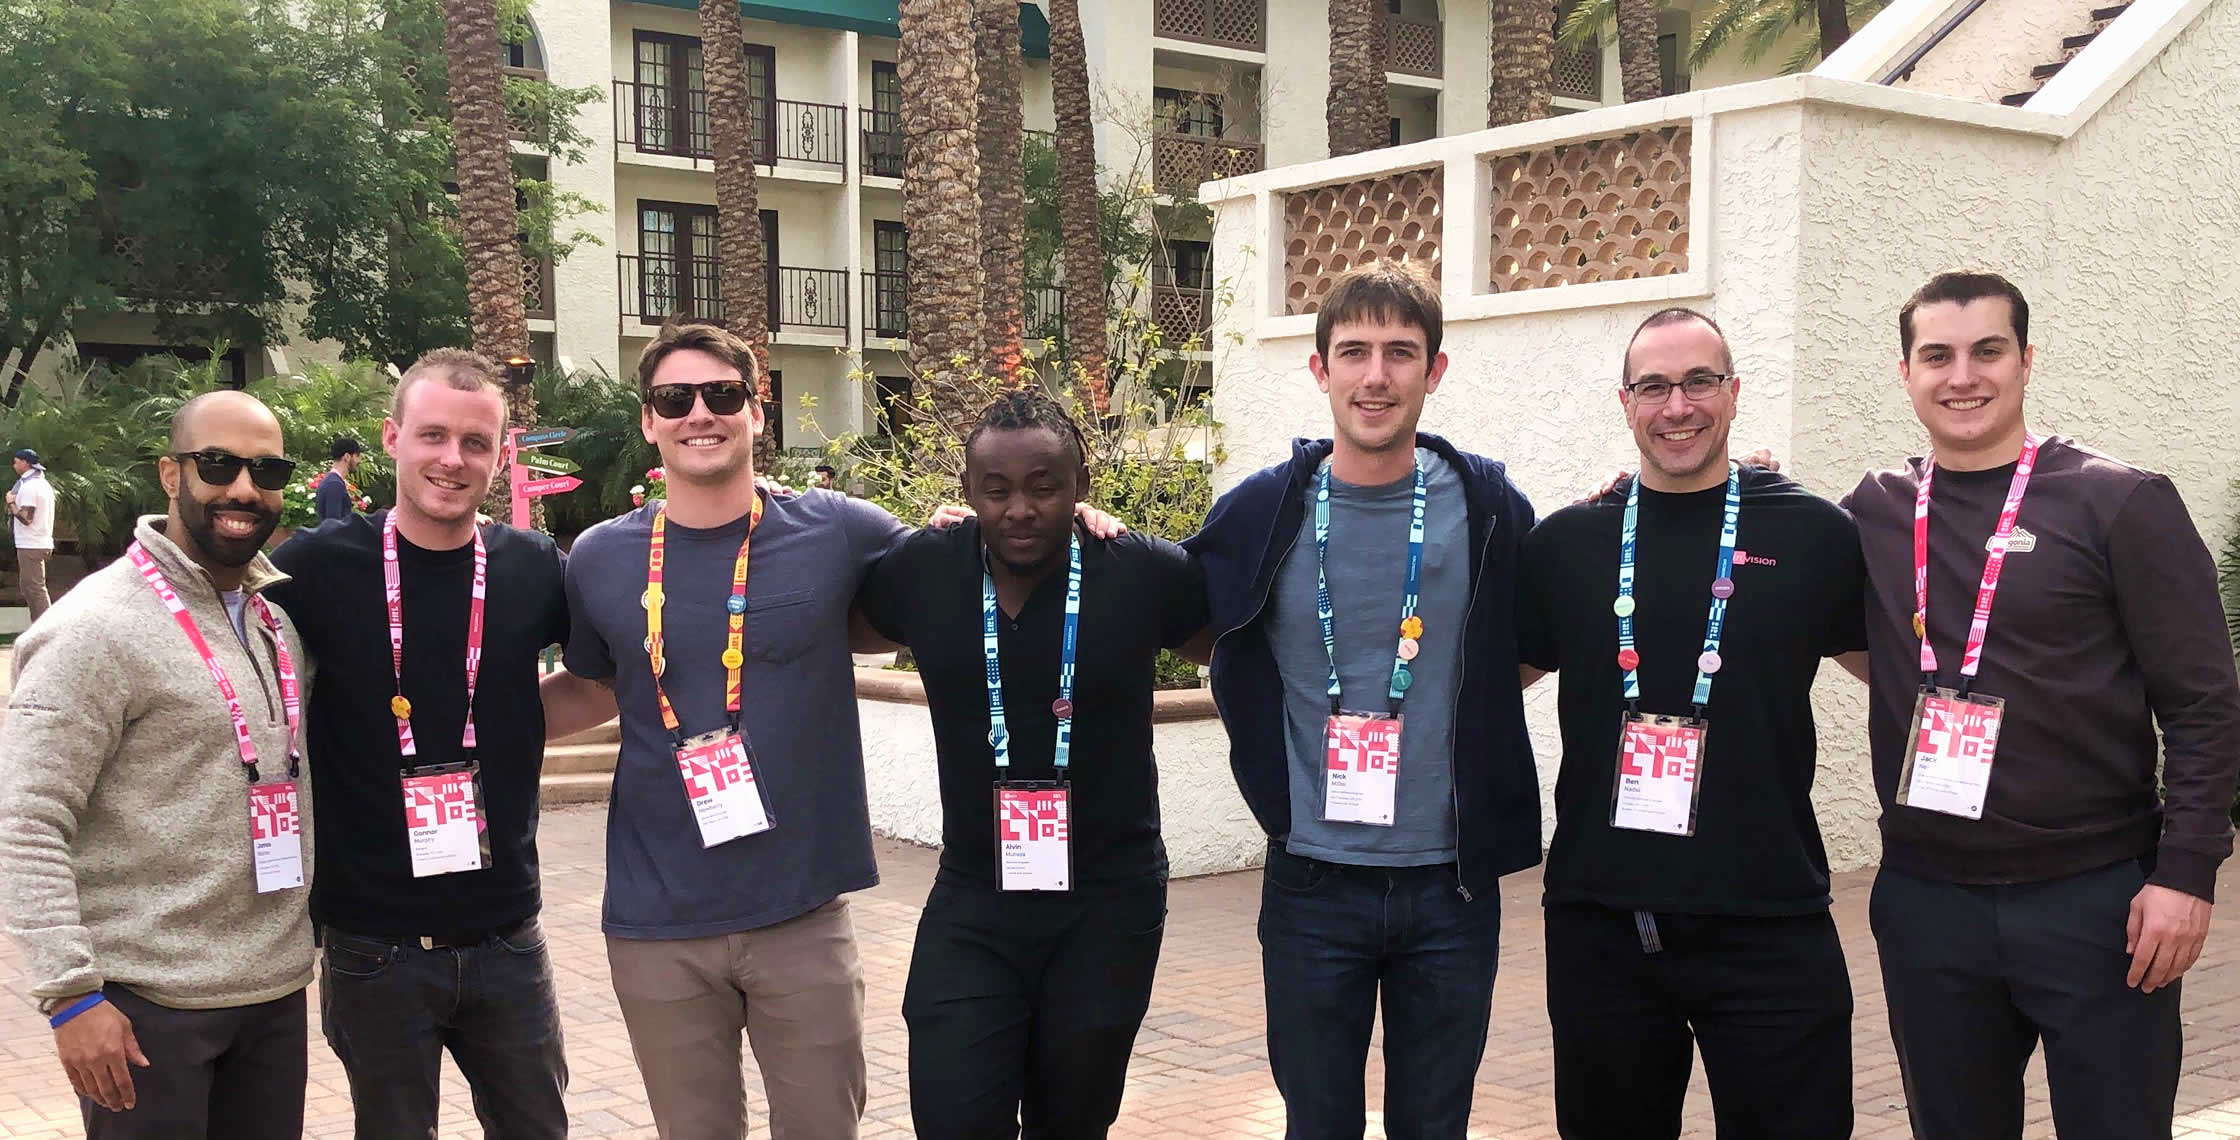 Ben Nadel at InVision In Real Life (IRL) 2019 (Phoenix, AZ) with: James Edward Murray, Connor Murphy, Drew Newberry, Alvin Mutisya, Nick Miller, and Jack Neil